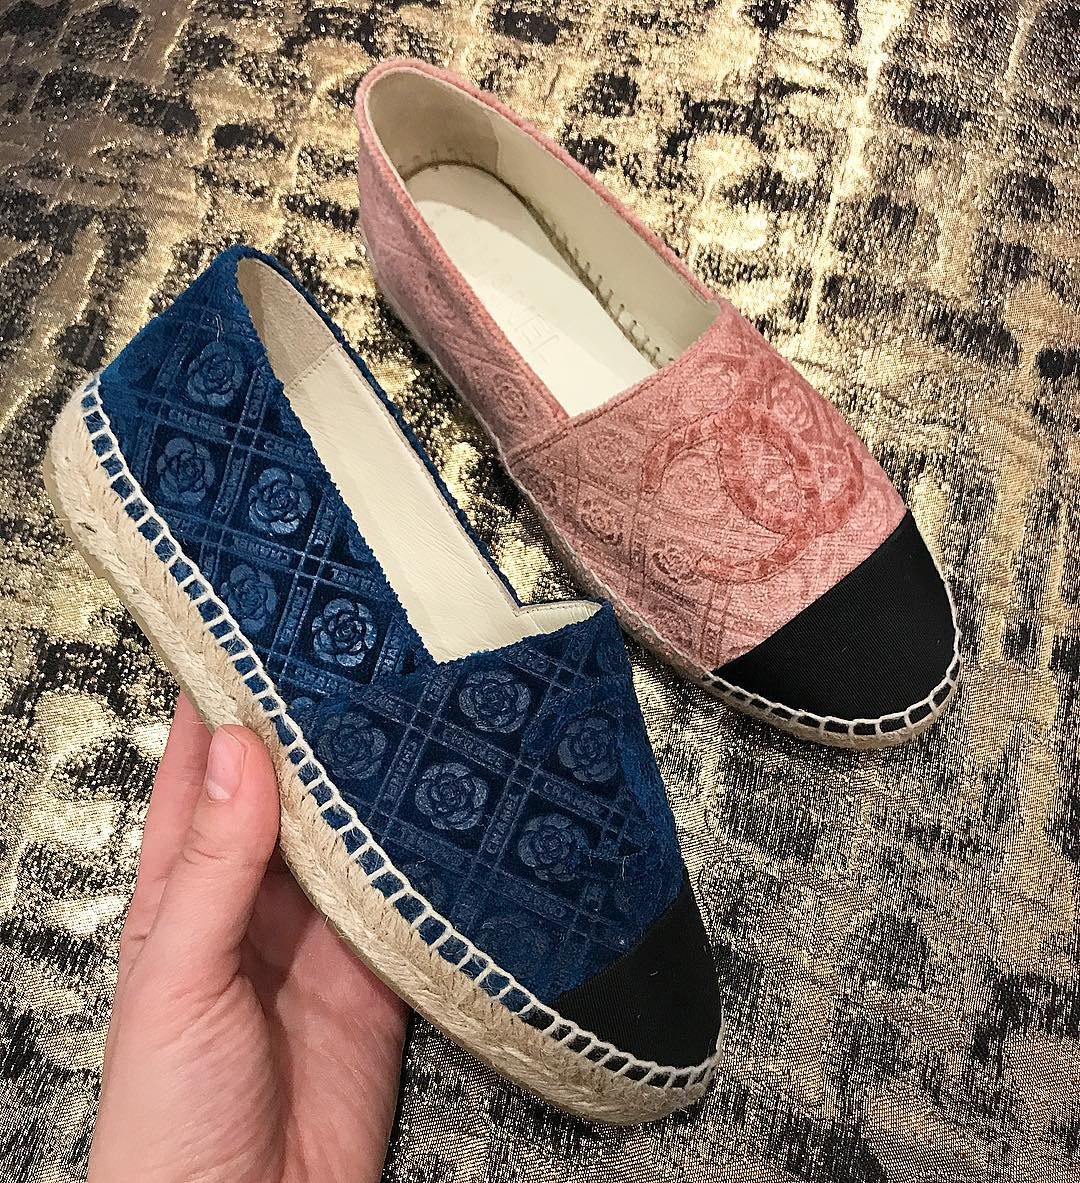 Chanel-Espadrilles-For-Pre-Fall-2017-Collection-6